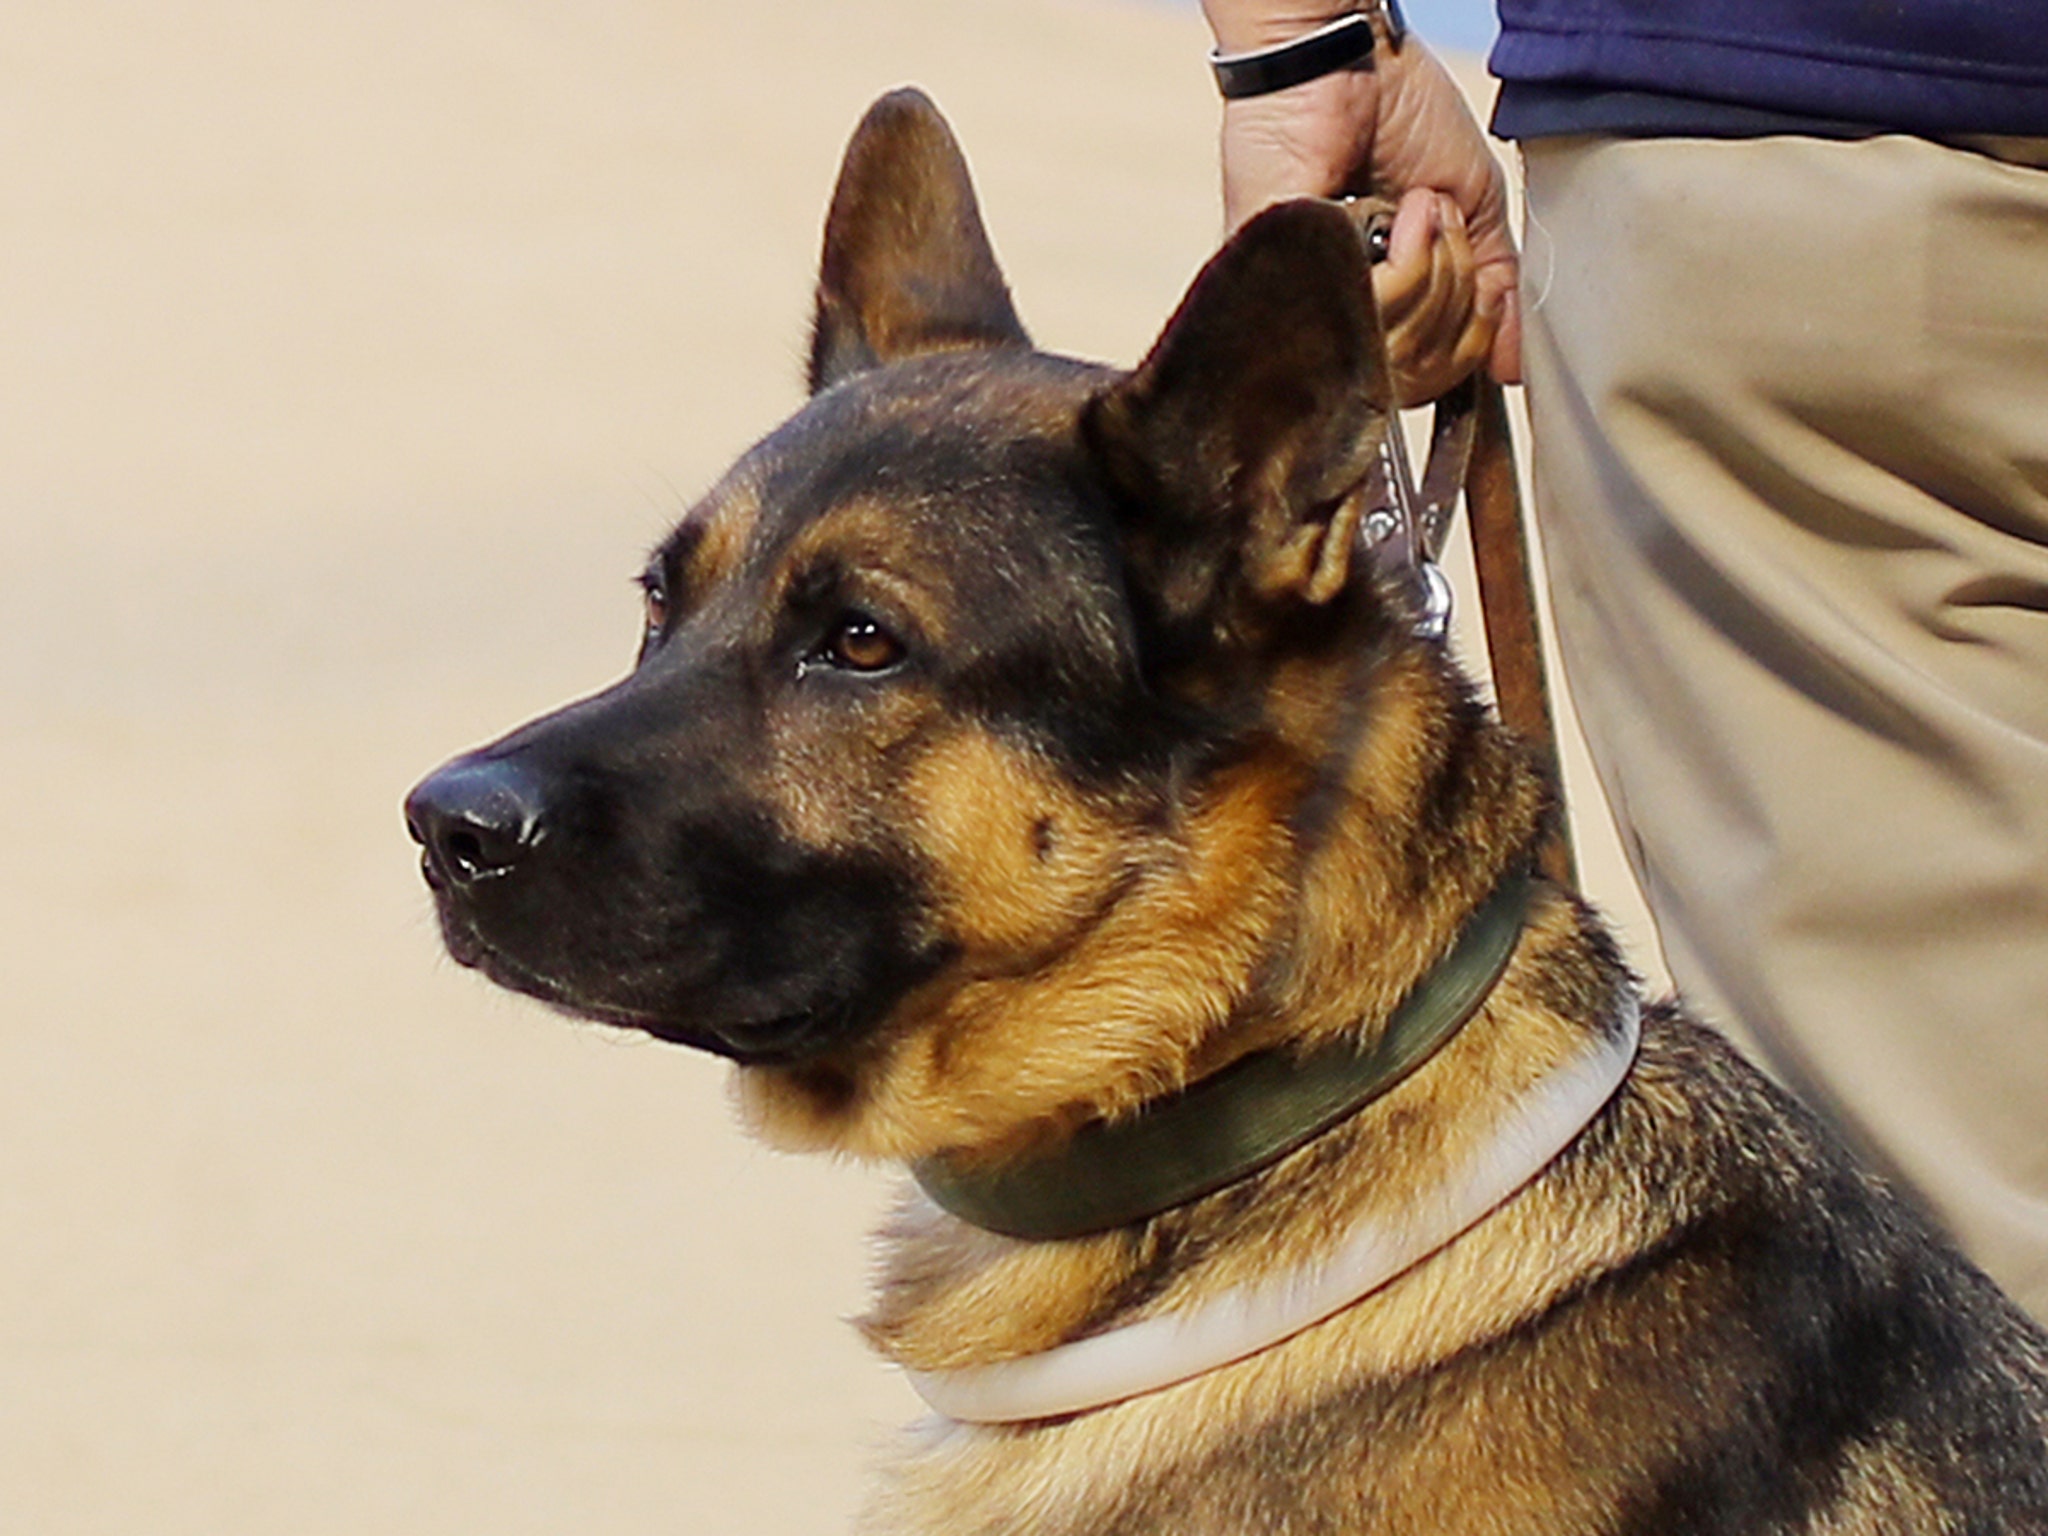 Service dog helps Red Sox's groundskeeper deal with PTSD